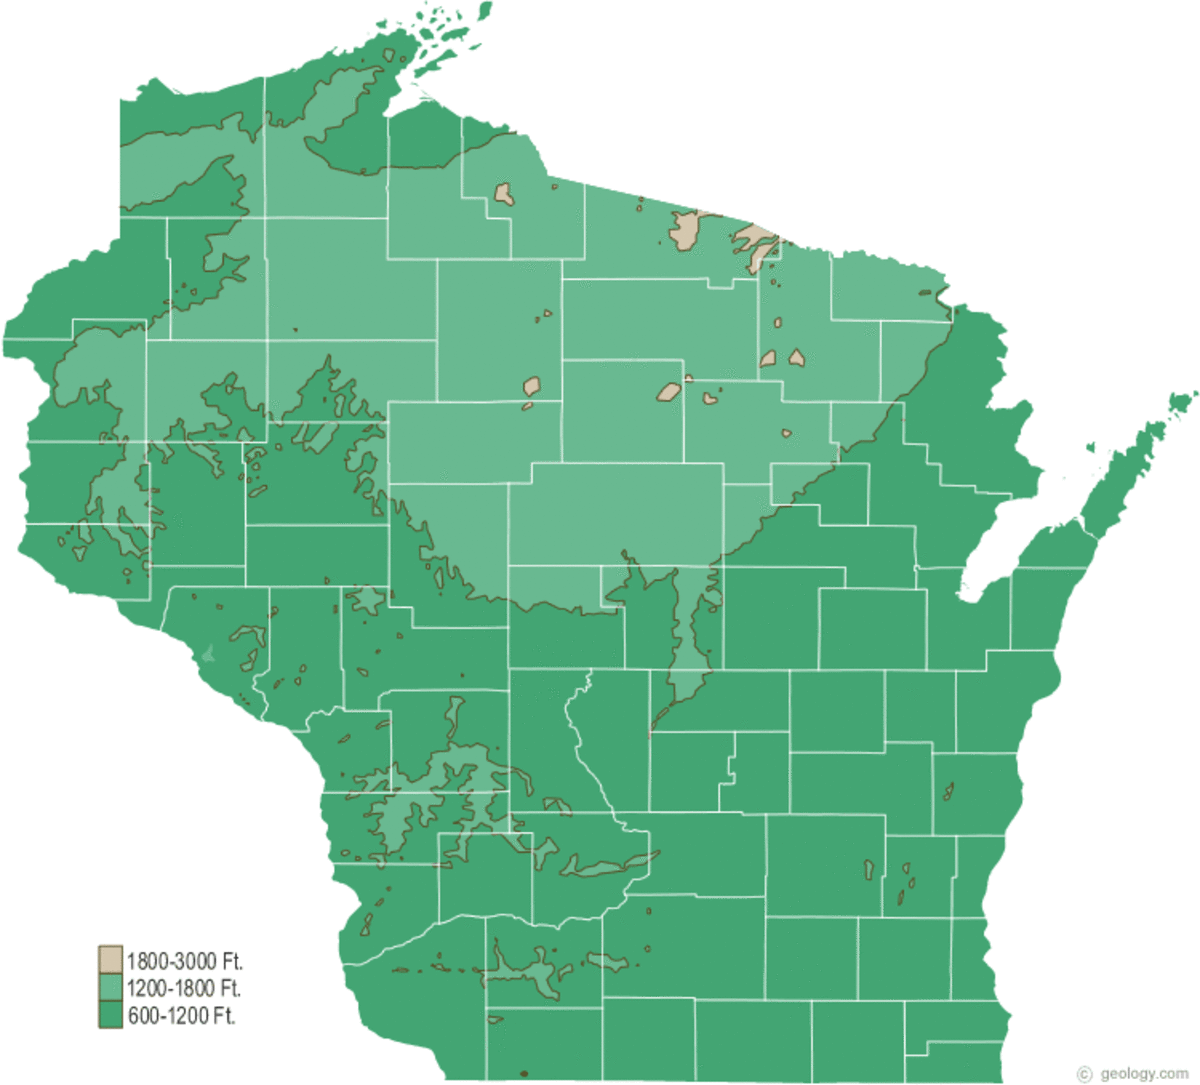 25 Reasons Wisconsin Kicks Your States Butt!